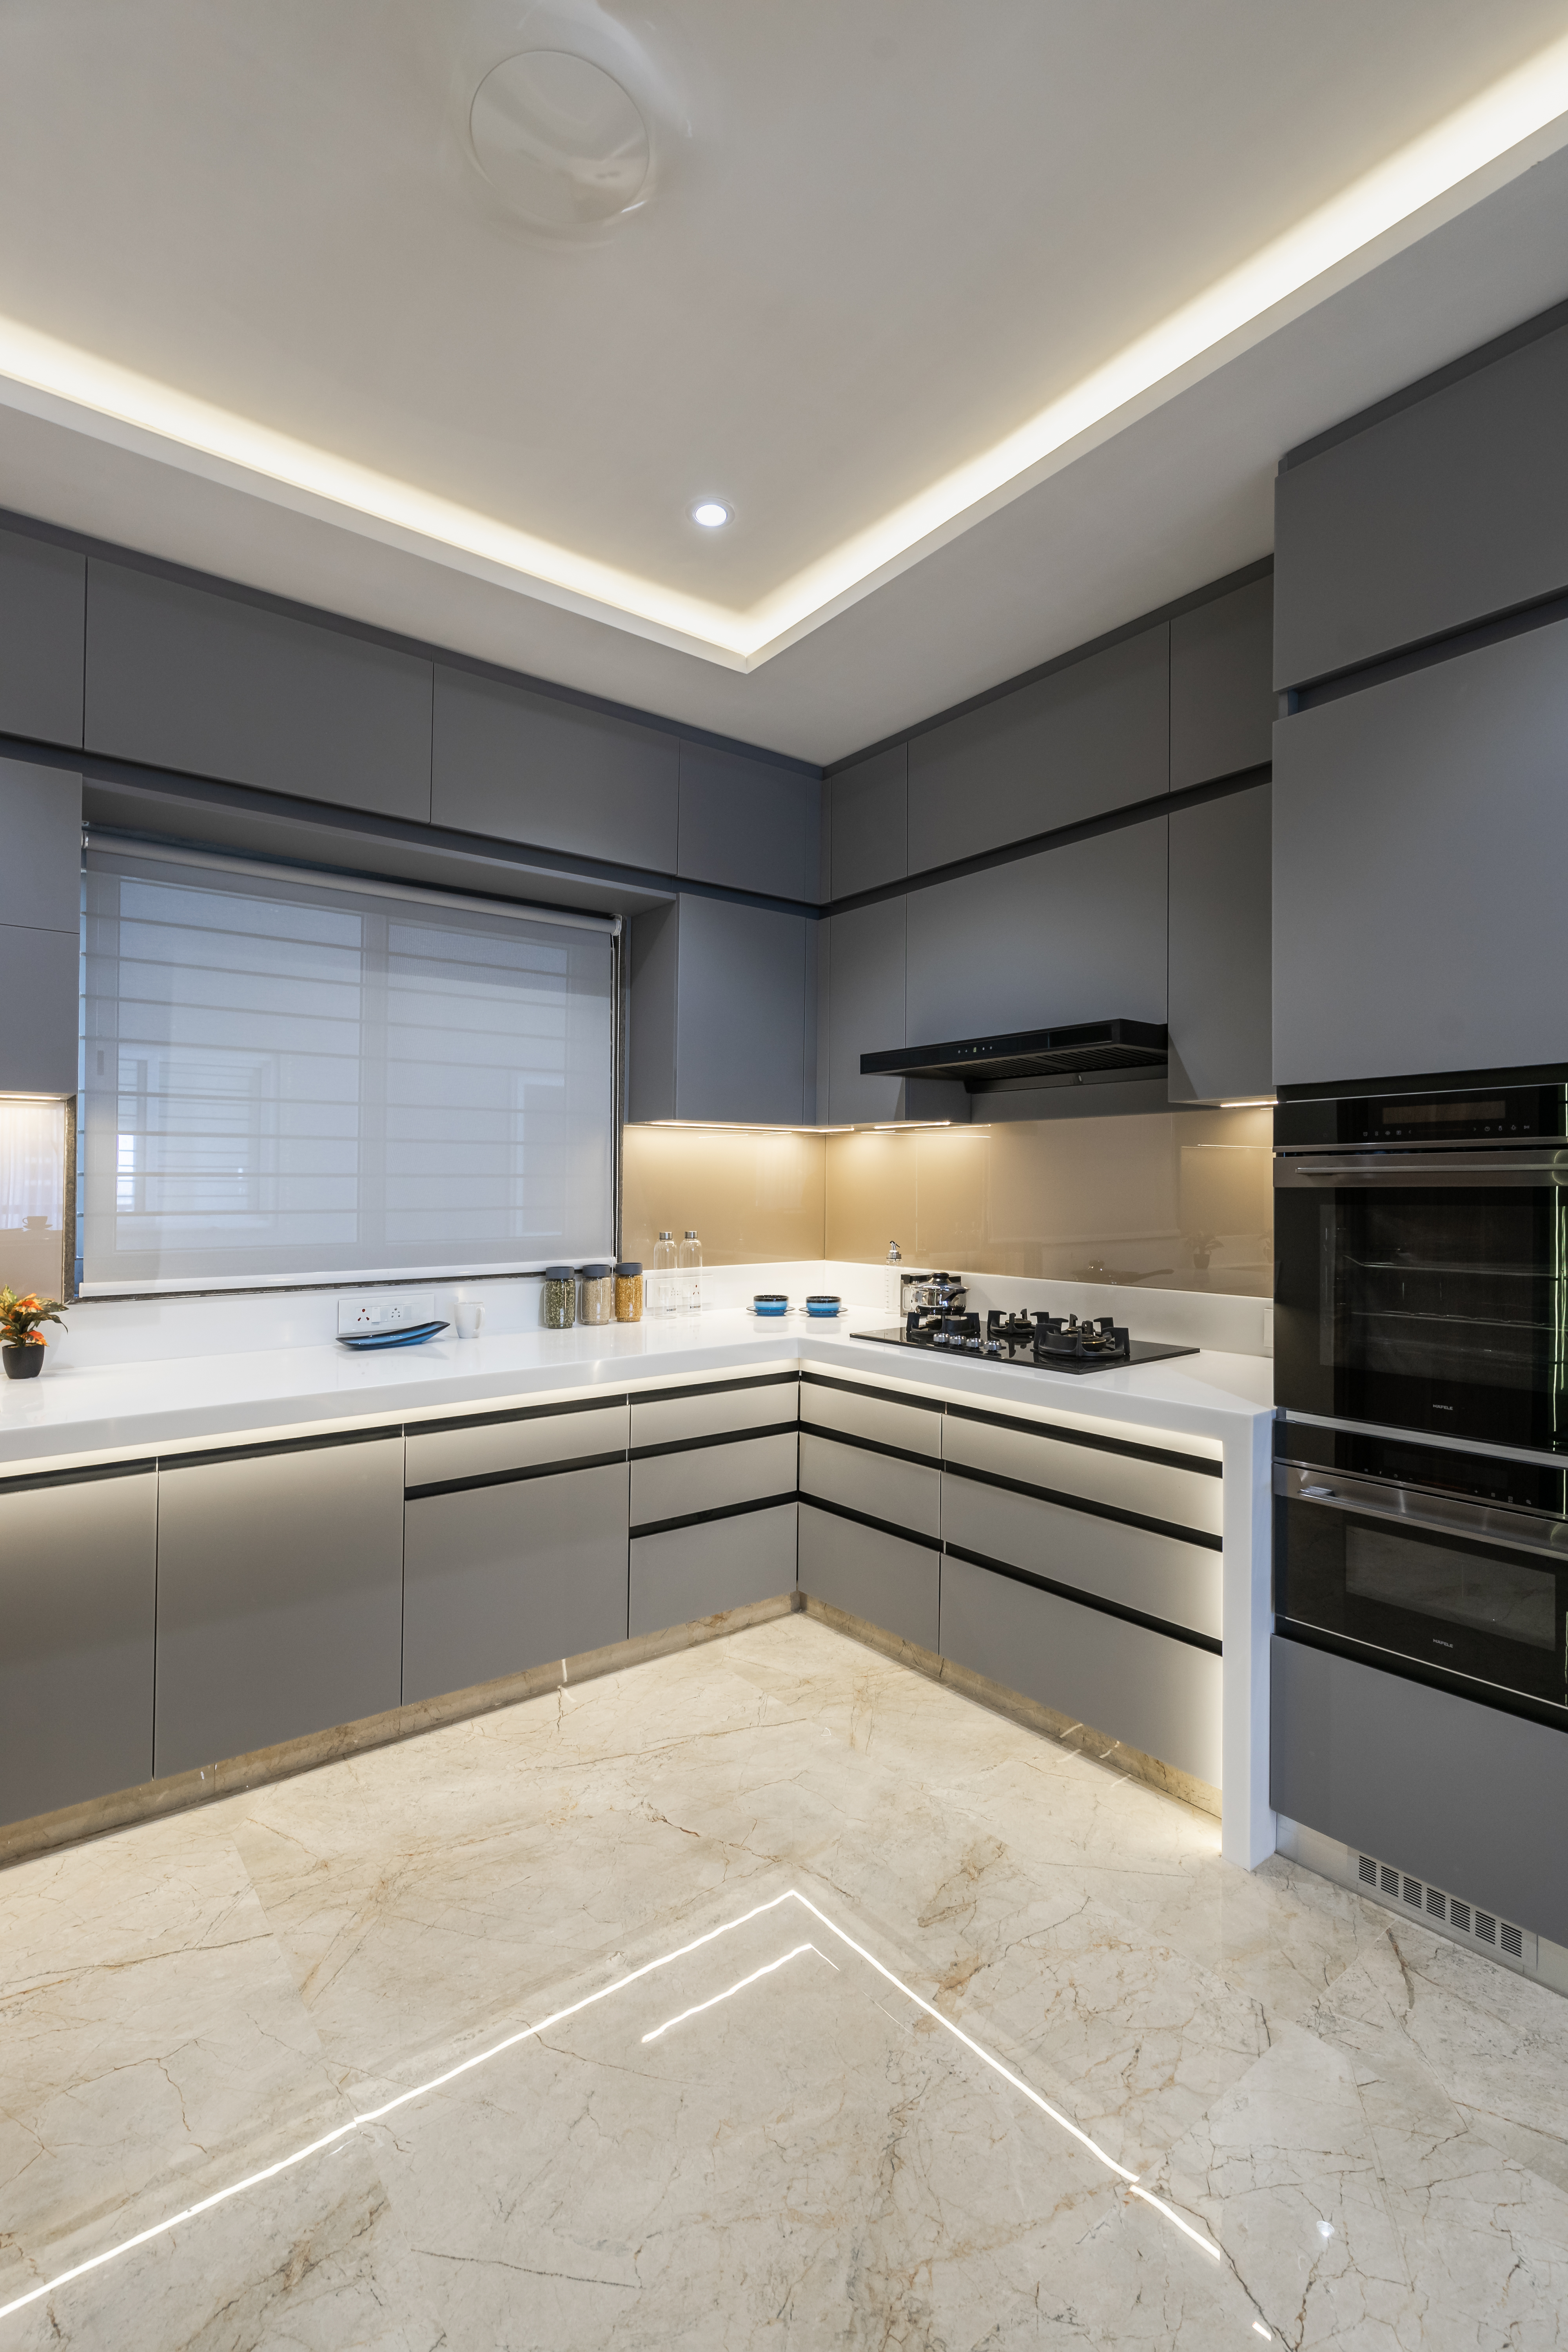 Why should you opt for a modular kitchen setup?